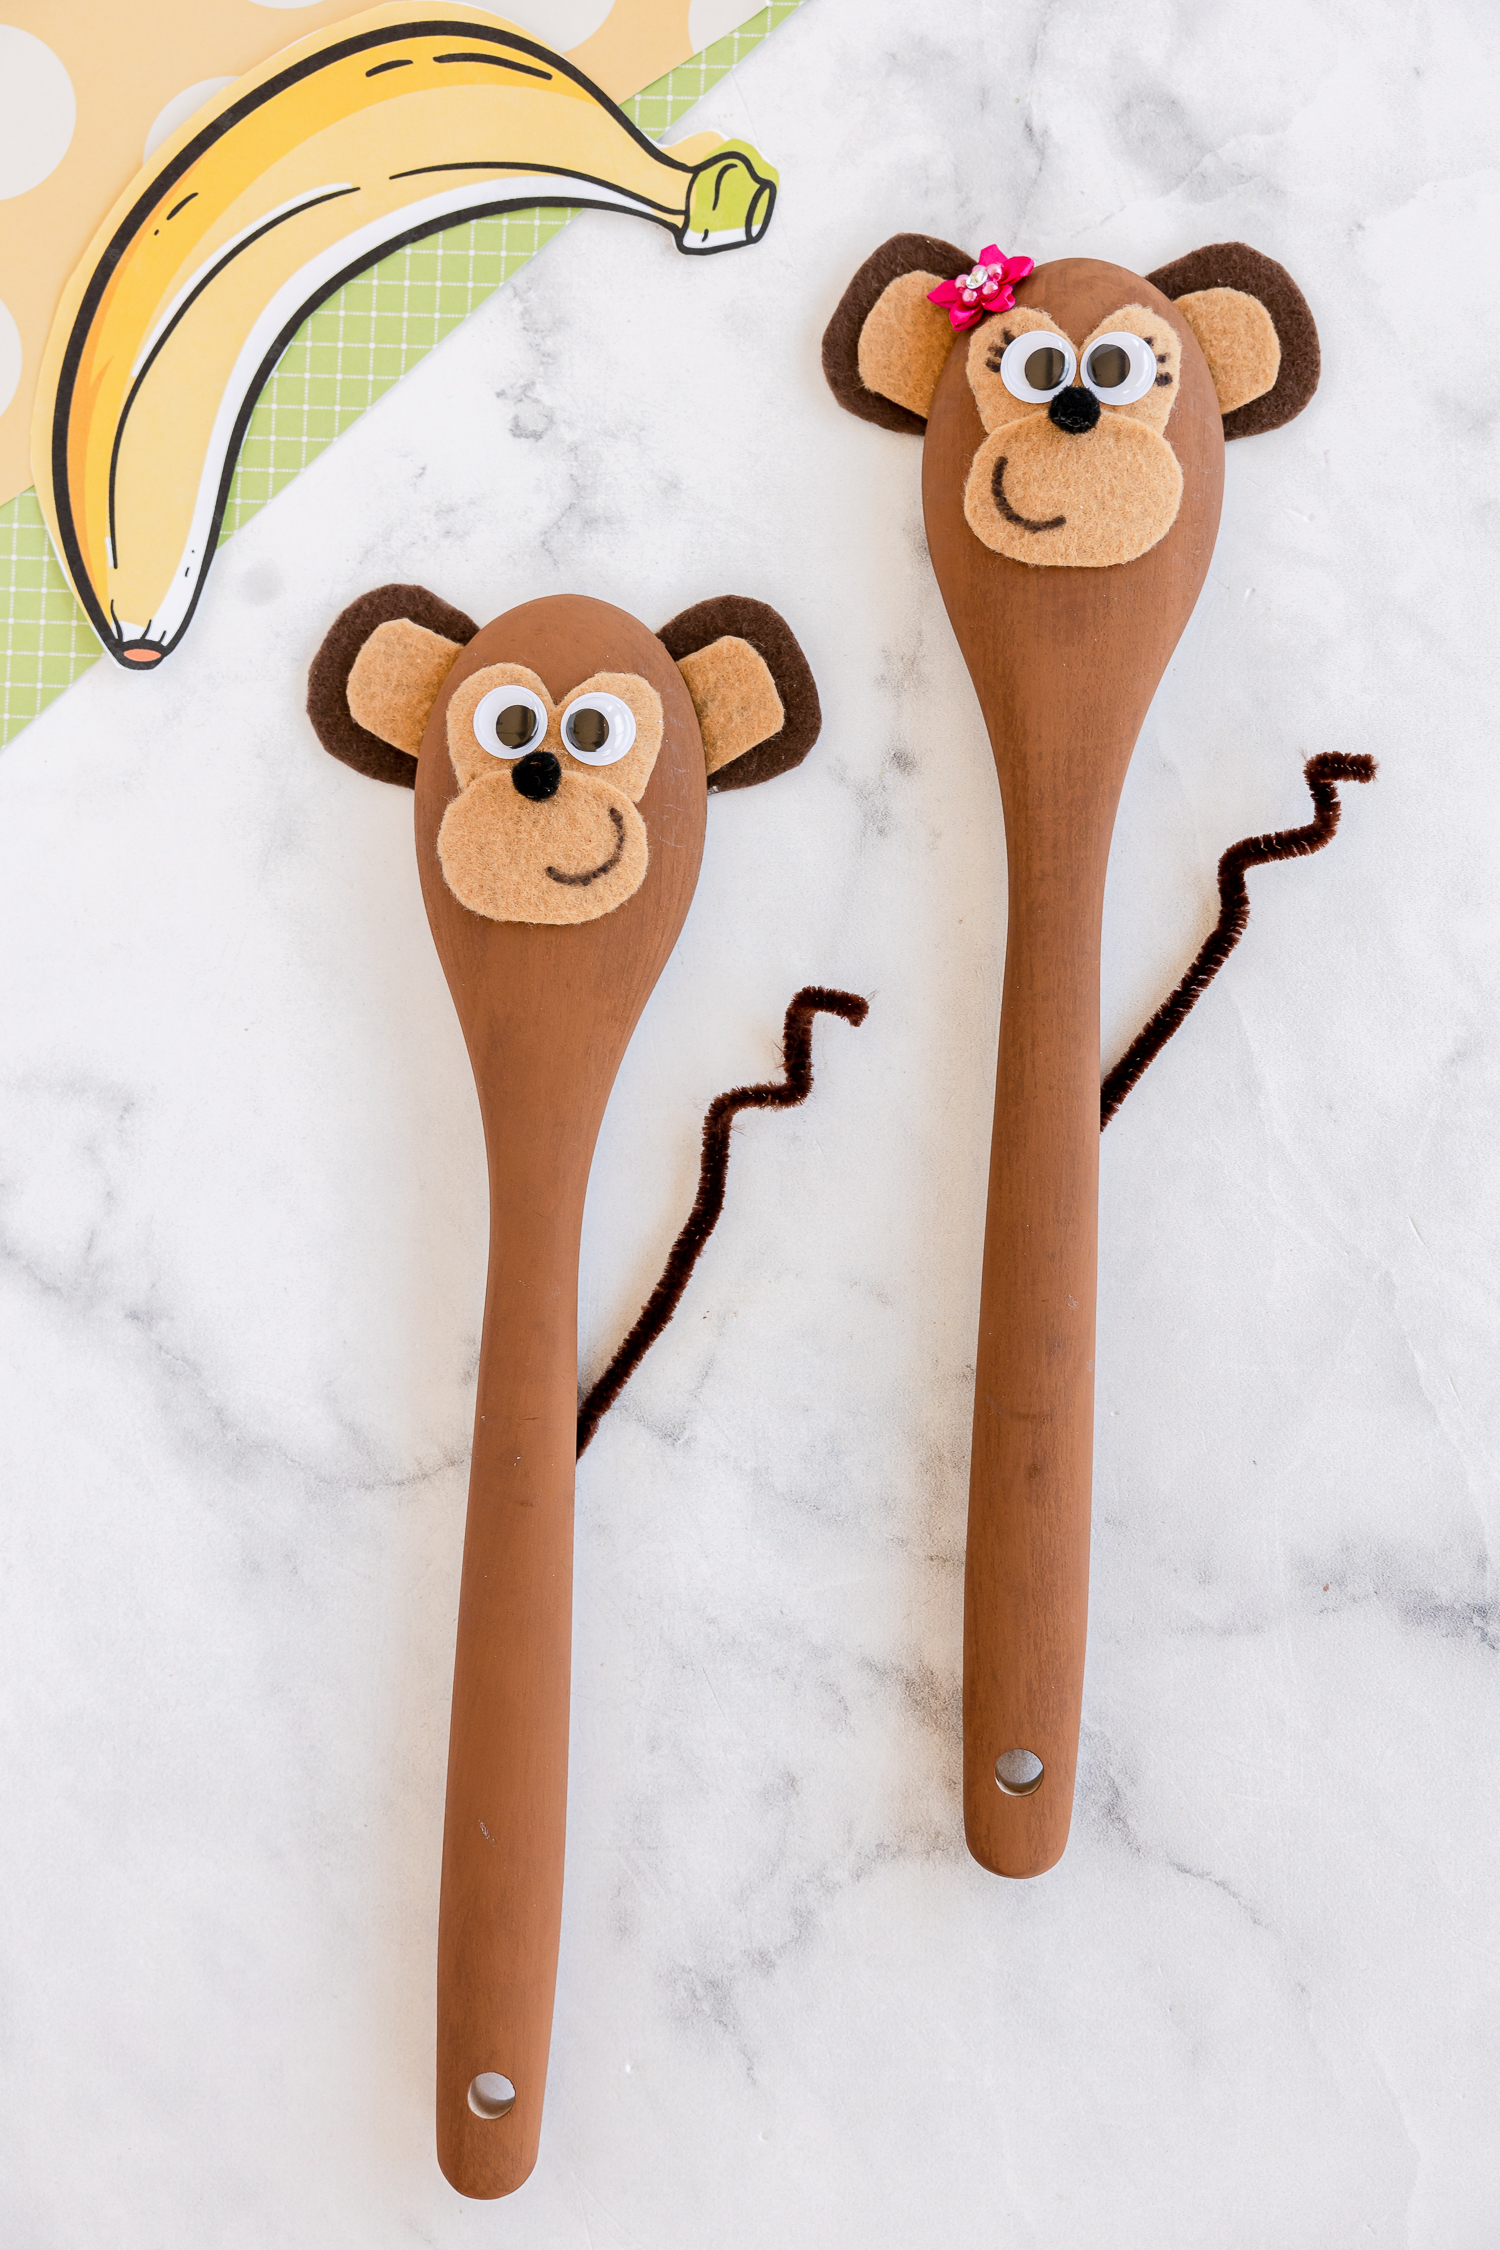 wooden spoons made into monkeys